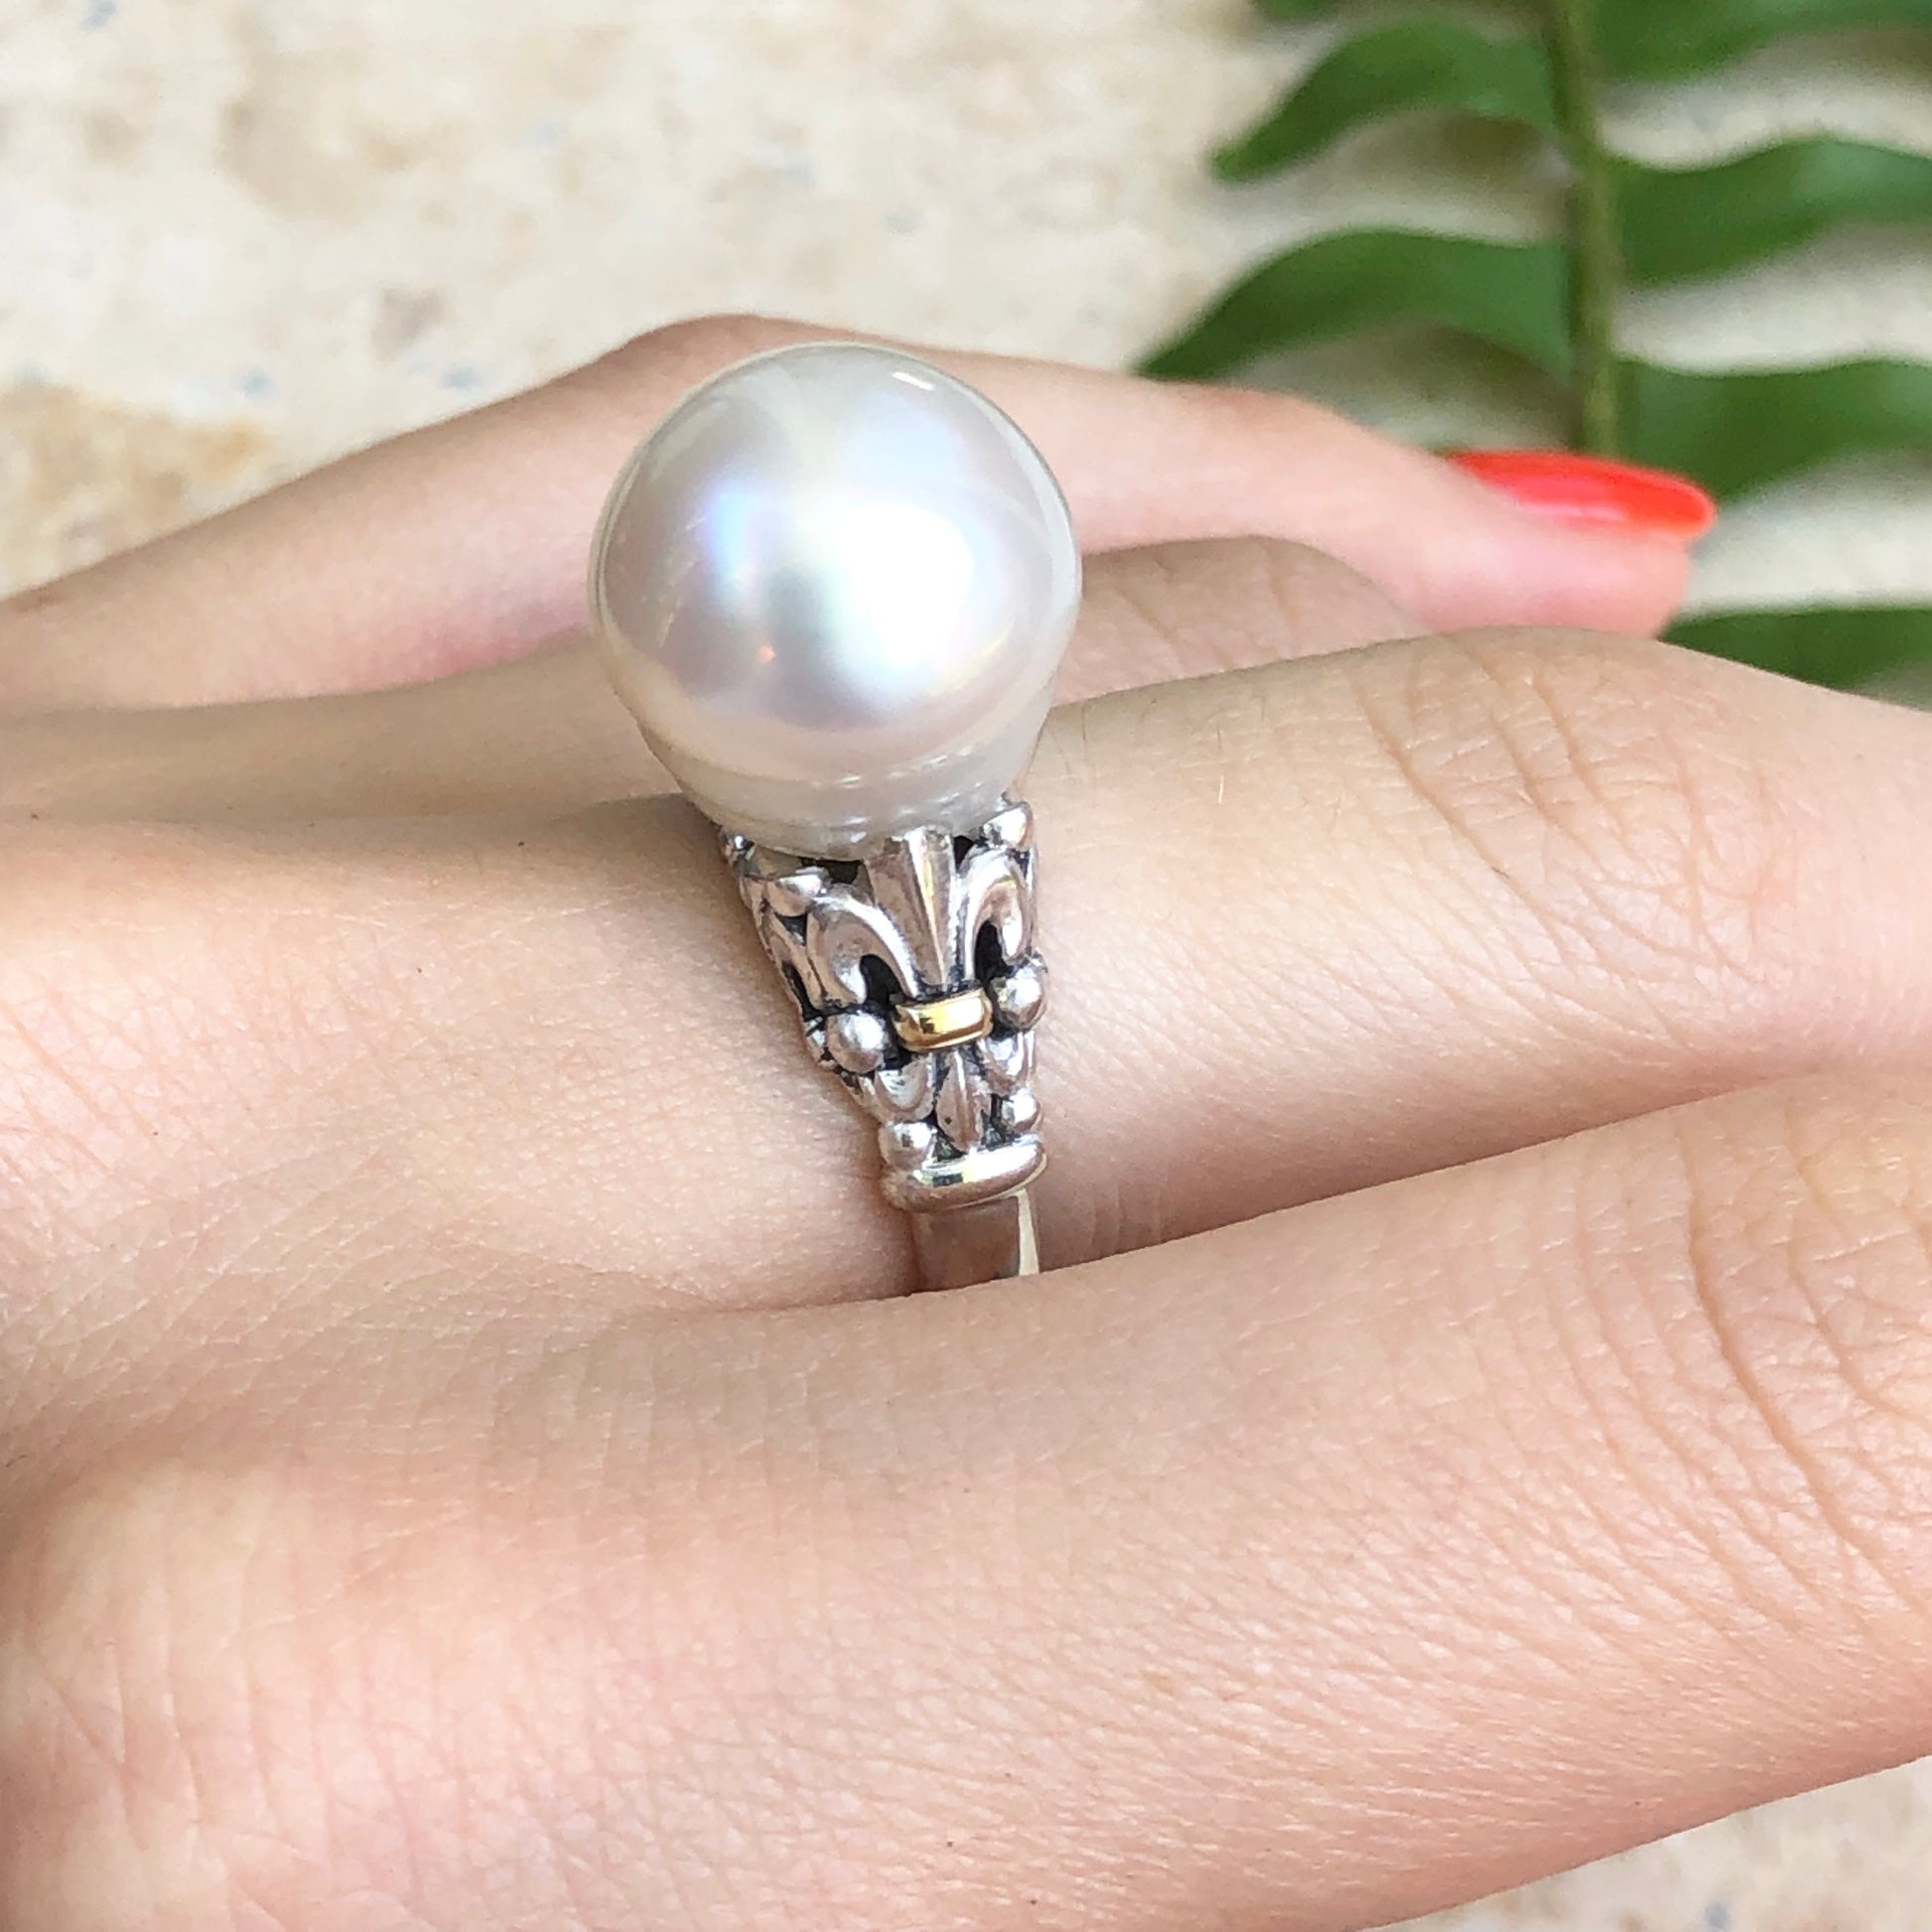 14KT Yellow Gold, Sterling Silver + Paspaley South Sea Pearl Fleur de Lis Ring - Legacy Saint Jewelry